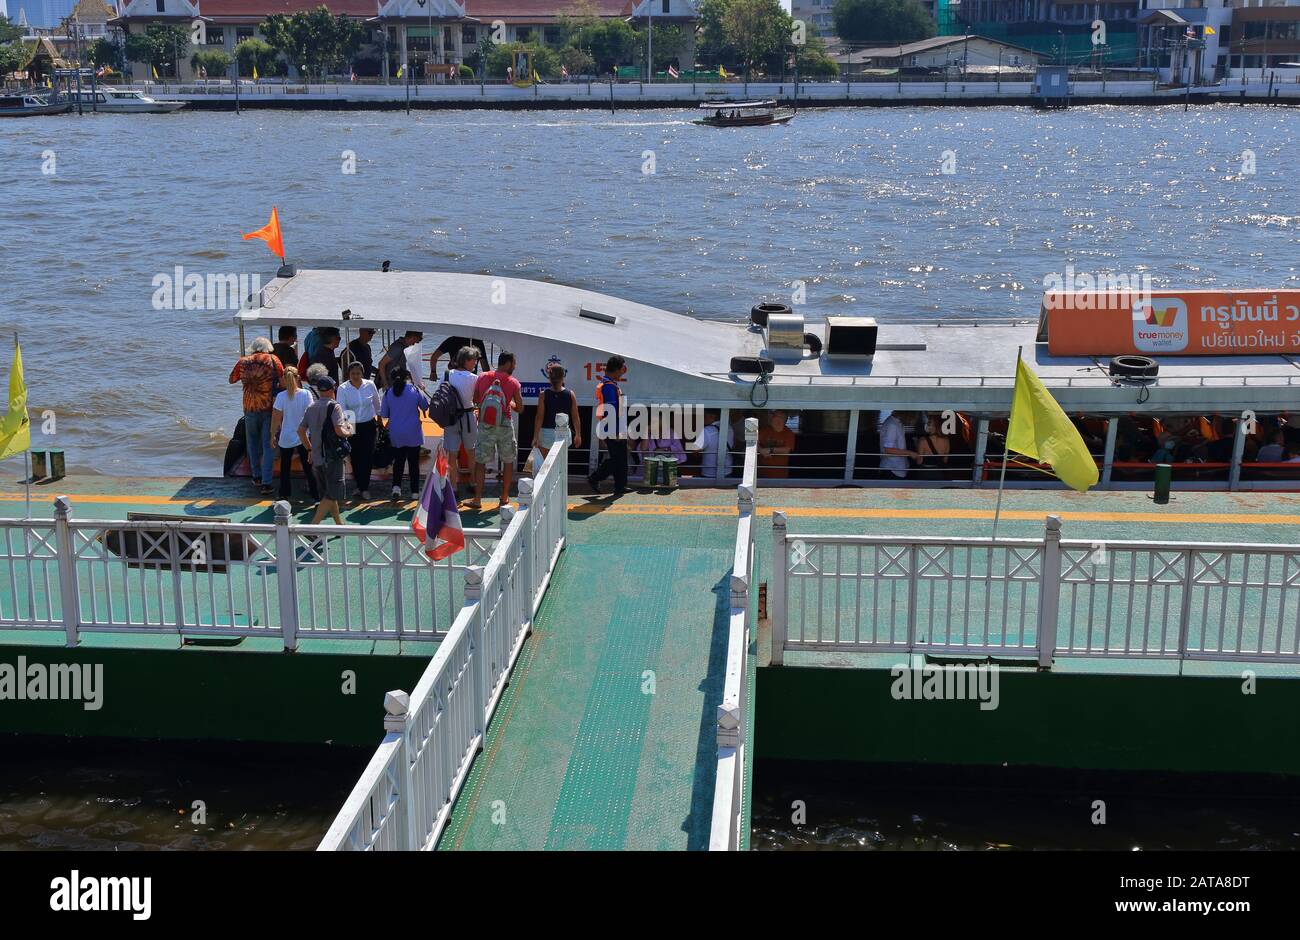 Bangkok, Thailand- January 28 2020: Group of tourists getting on and off the tourist boat at Yodpiman pier on Chao Phraya river Stock Photo